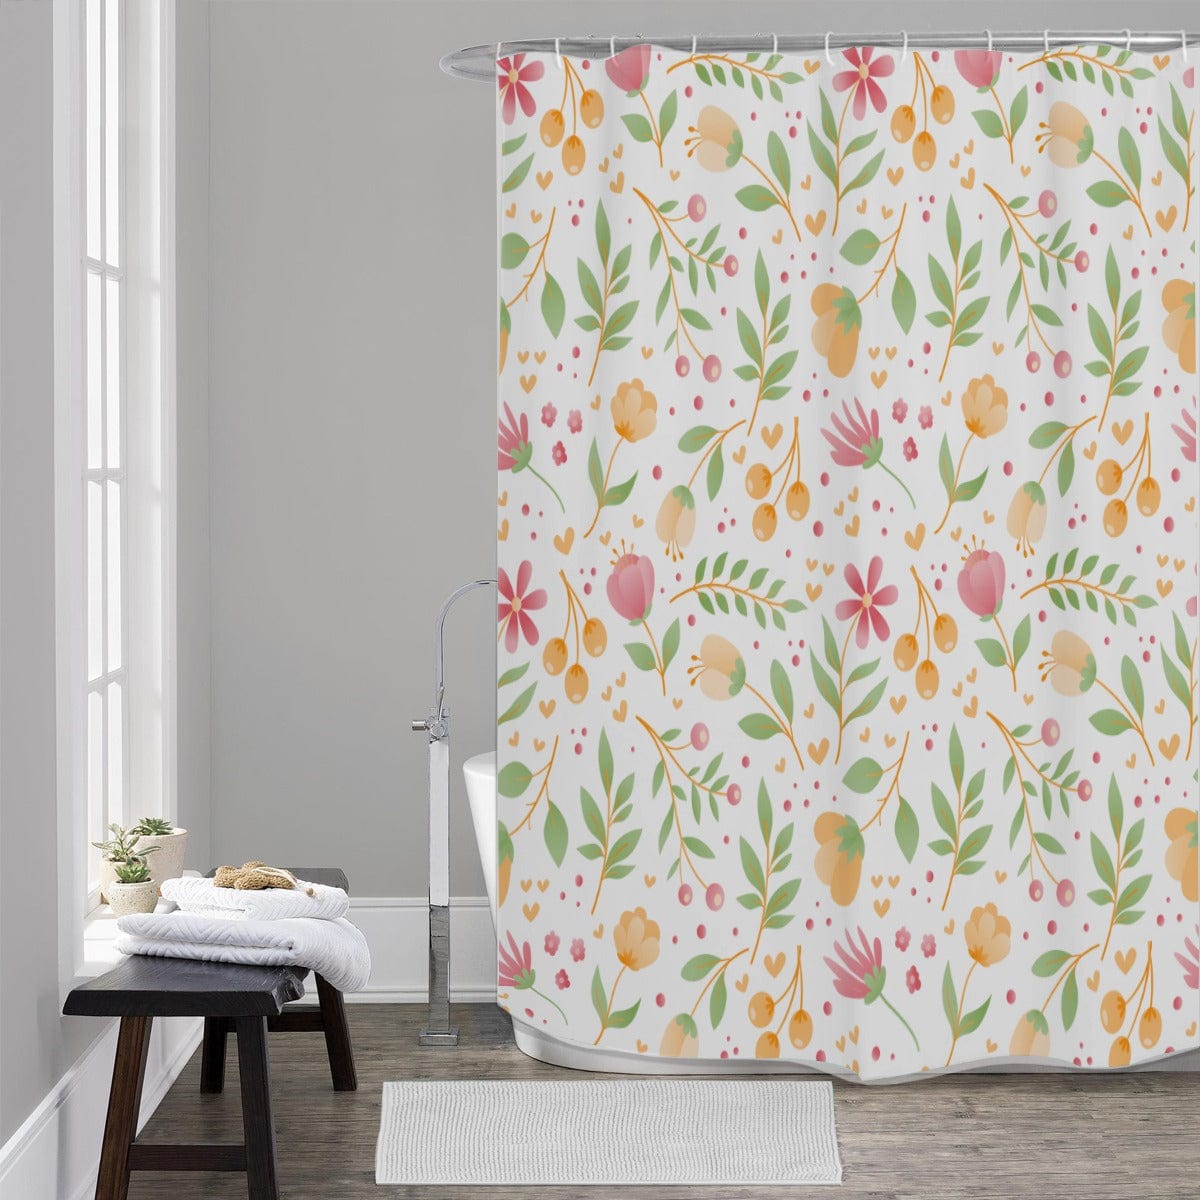 Yoycol Shower Curtain Spring Flowers Shower Curtains 150（gsm）